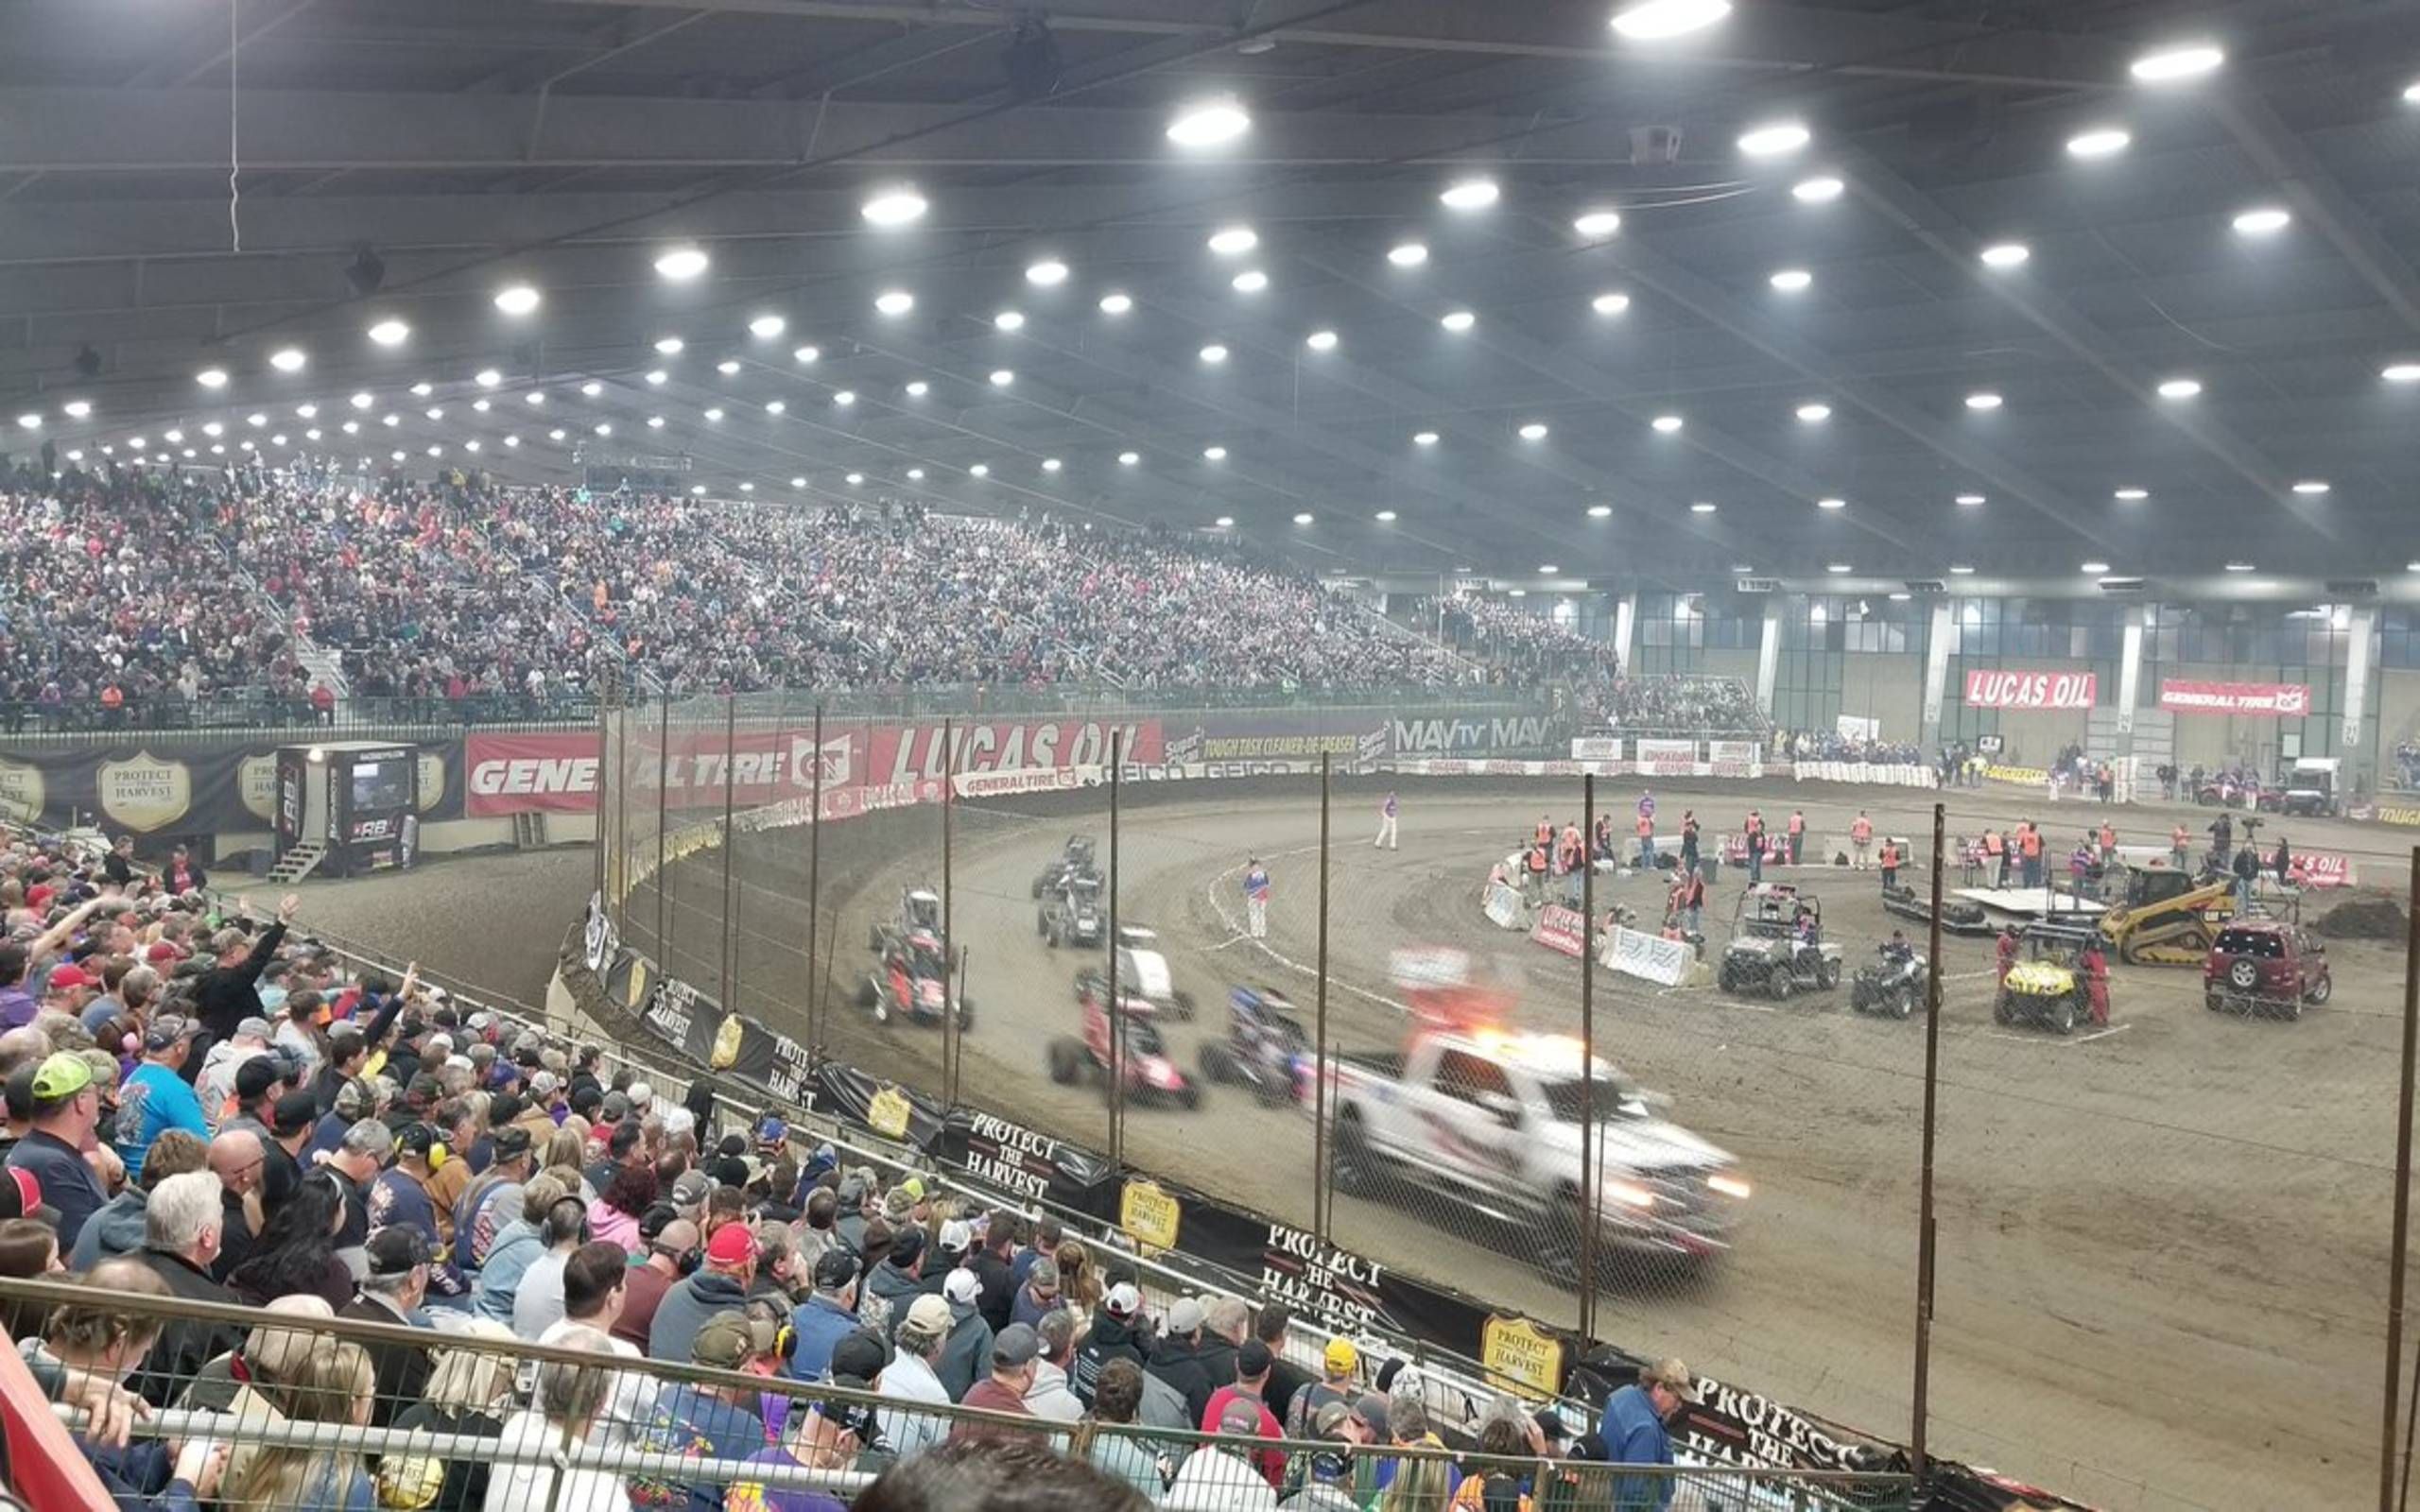 Cold outside, Hot inside Thats the Chili Bowl Midget Nationals